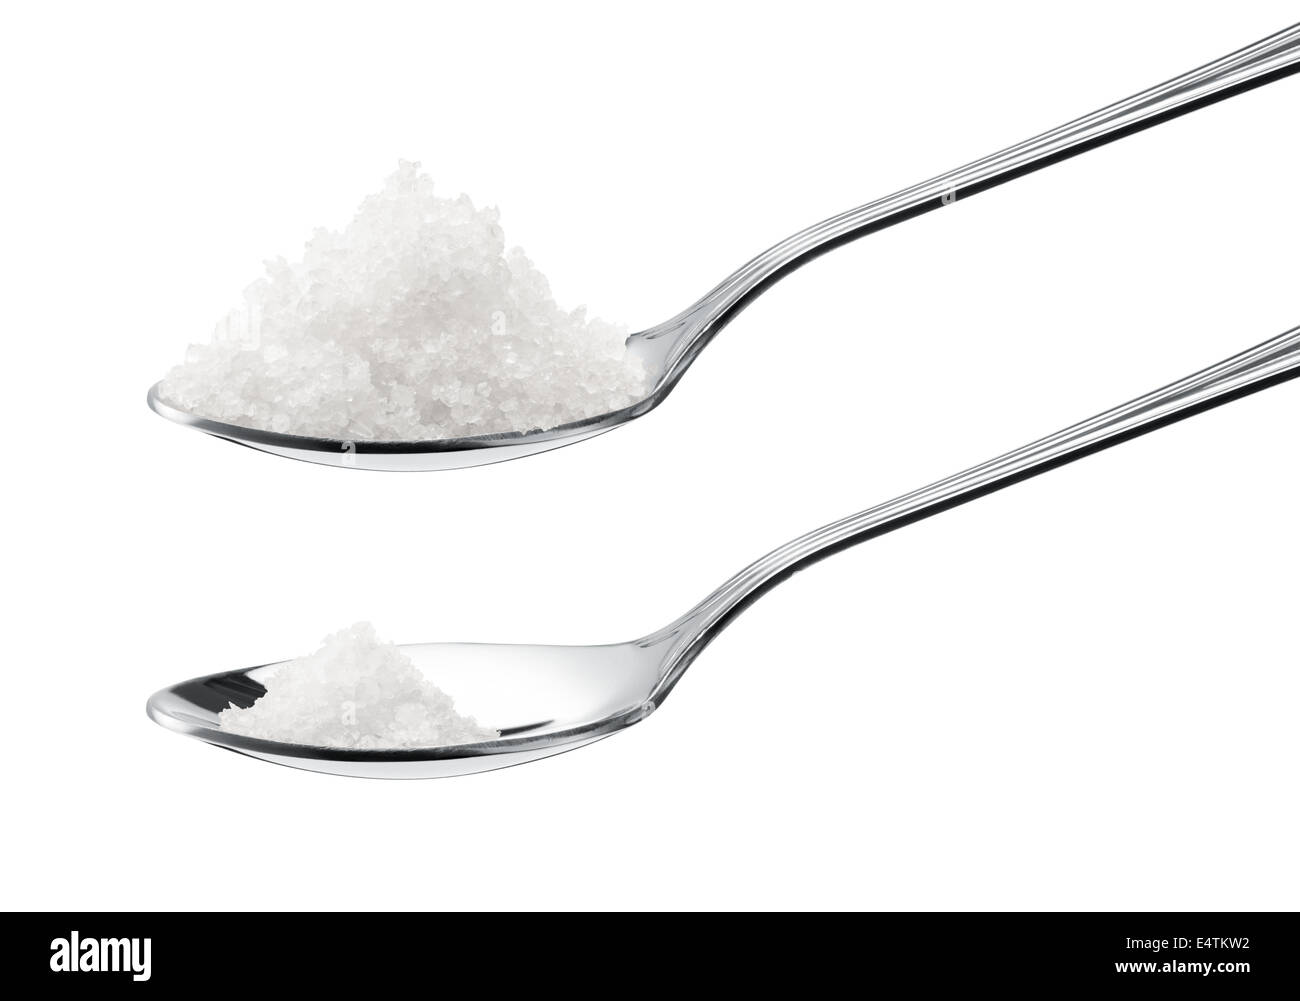 less salt versus more on teaspoons, healthy eating concept Stock Photo